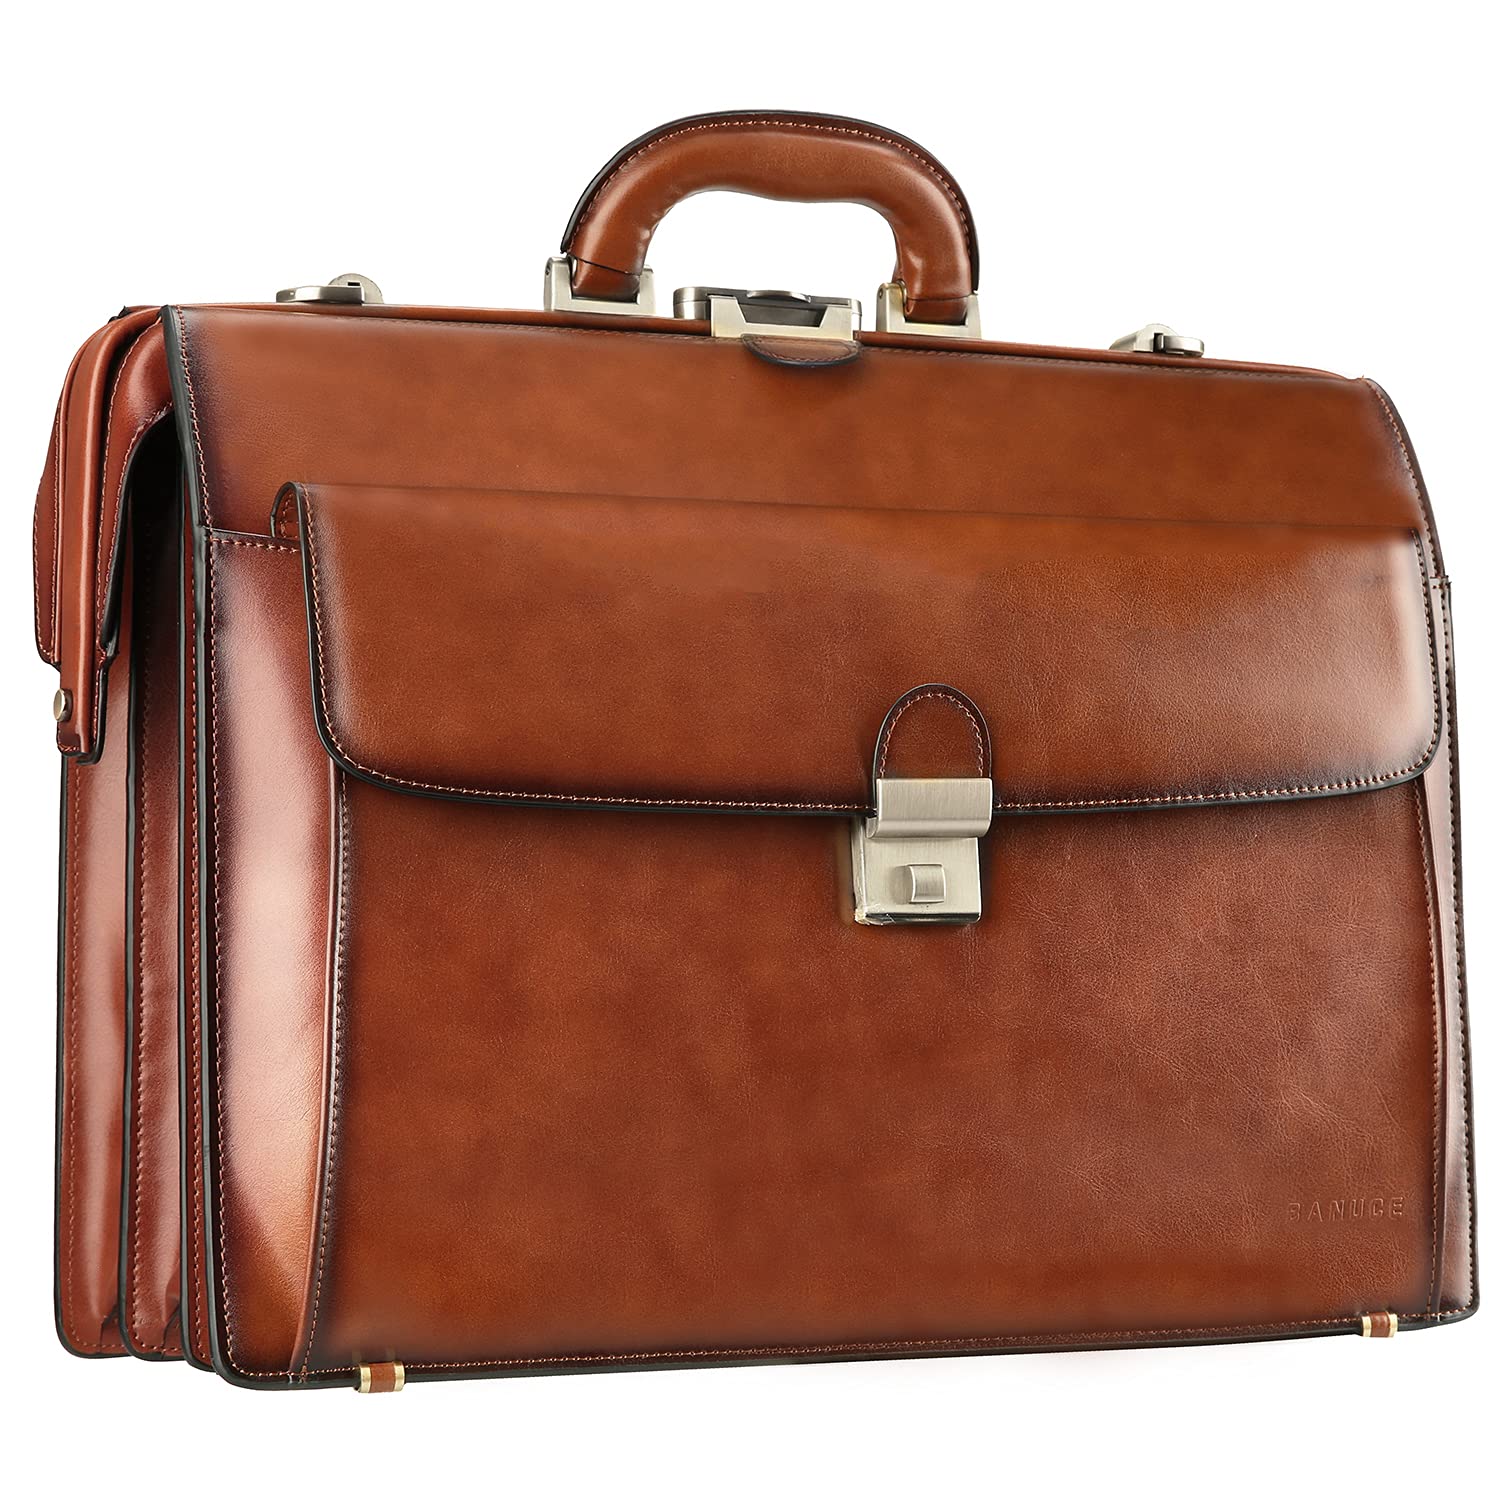 Banuce Leather Briefcase for Men with Lock Lawyer Attache case Hard 156 Laptop Attorney Litigator Bag Doctor Style Bag